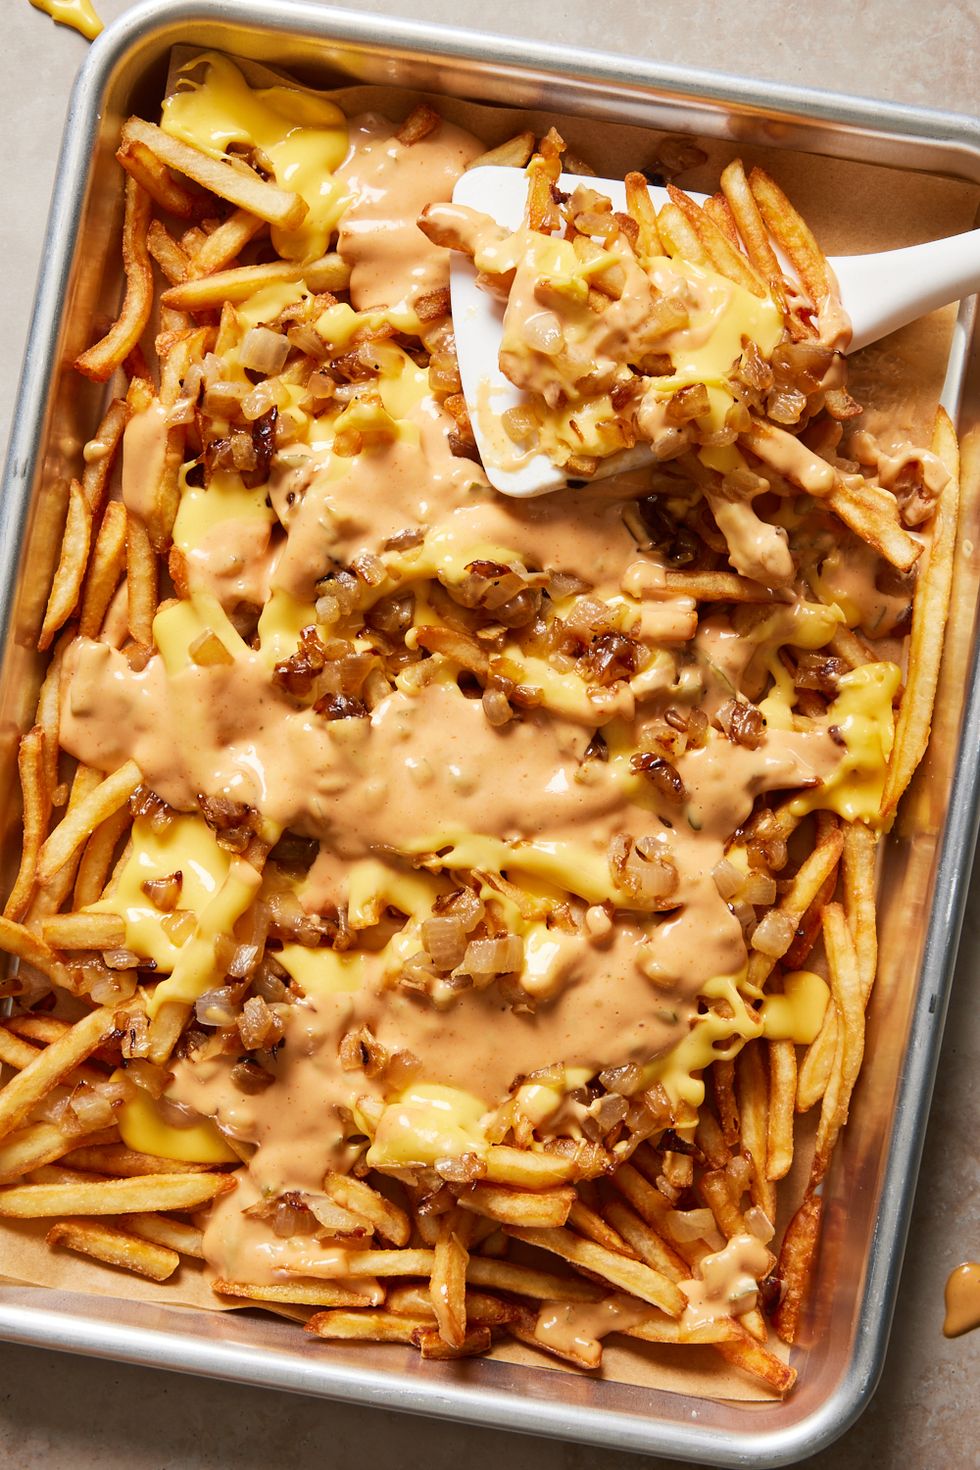 https://hips.hearstapps.com/hmg-prod/images/220907-delish-seo-animal-style-fries-0253-eb-1663271434.jpg?crop=0.9057971014492754xw:1xh;center,top&resize=980:*